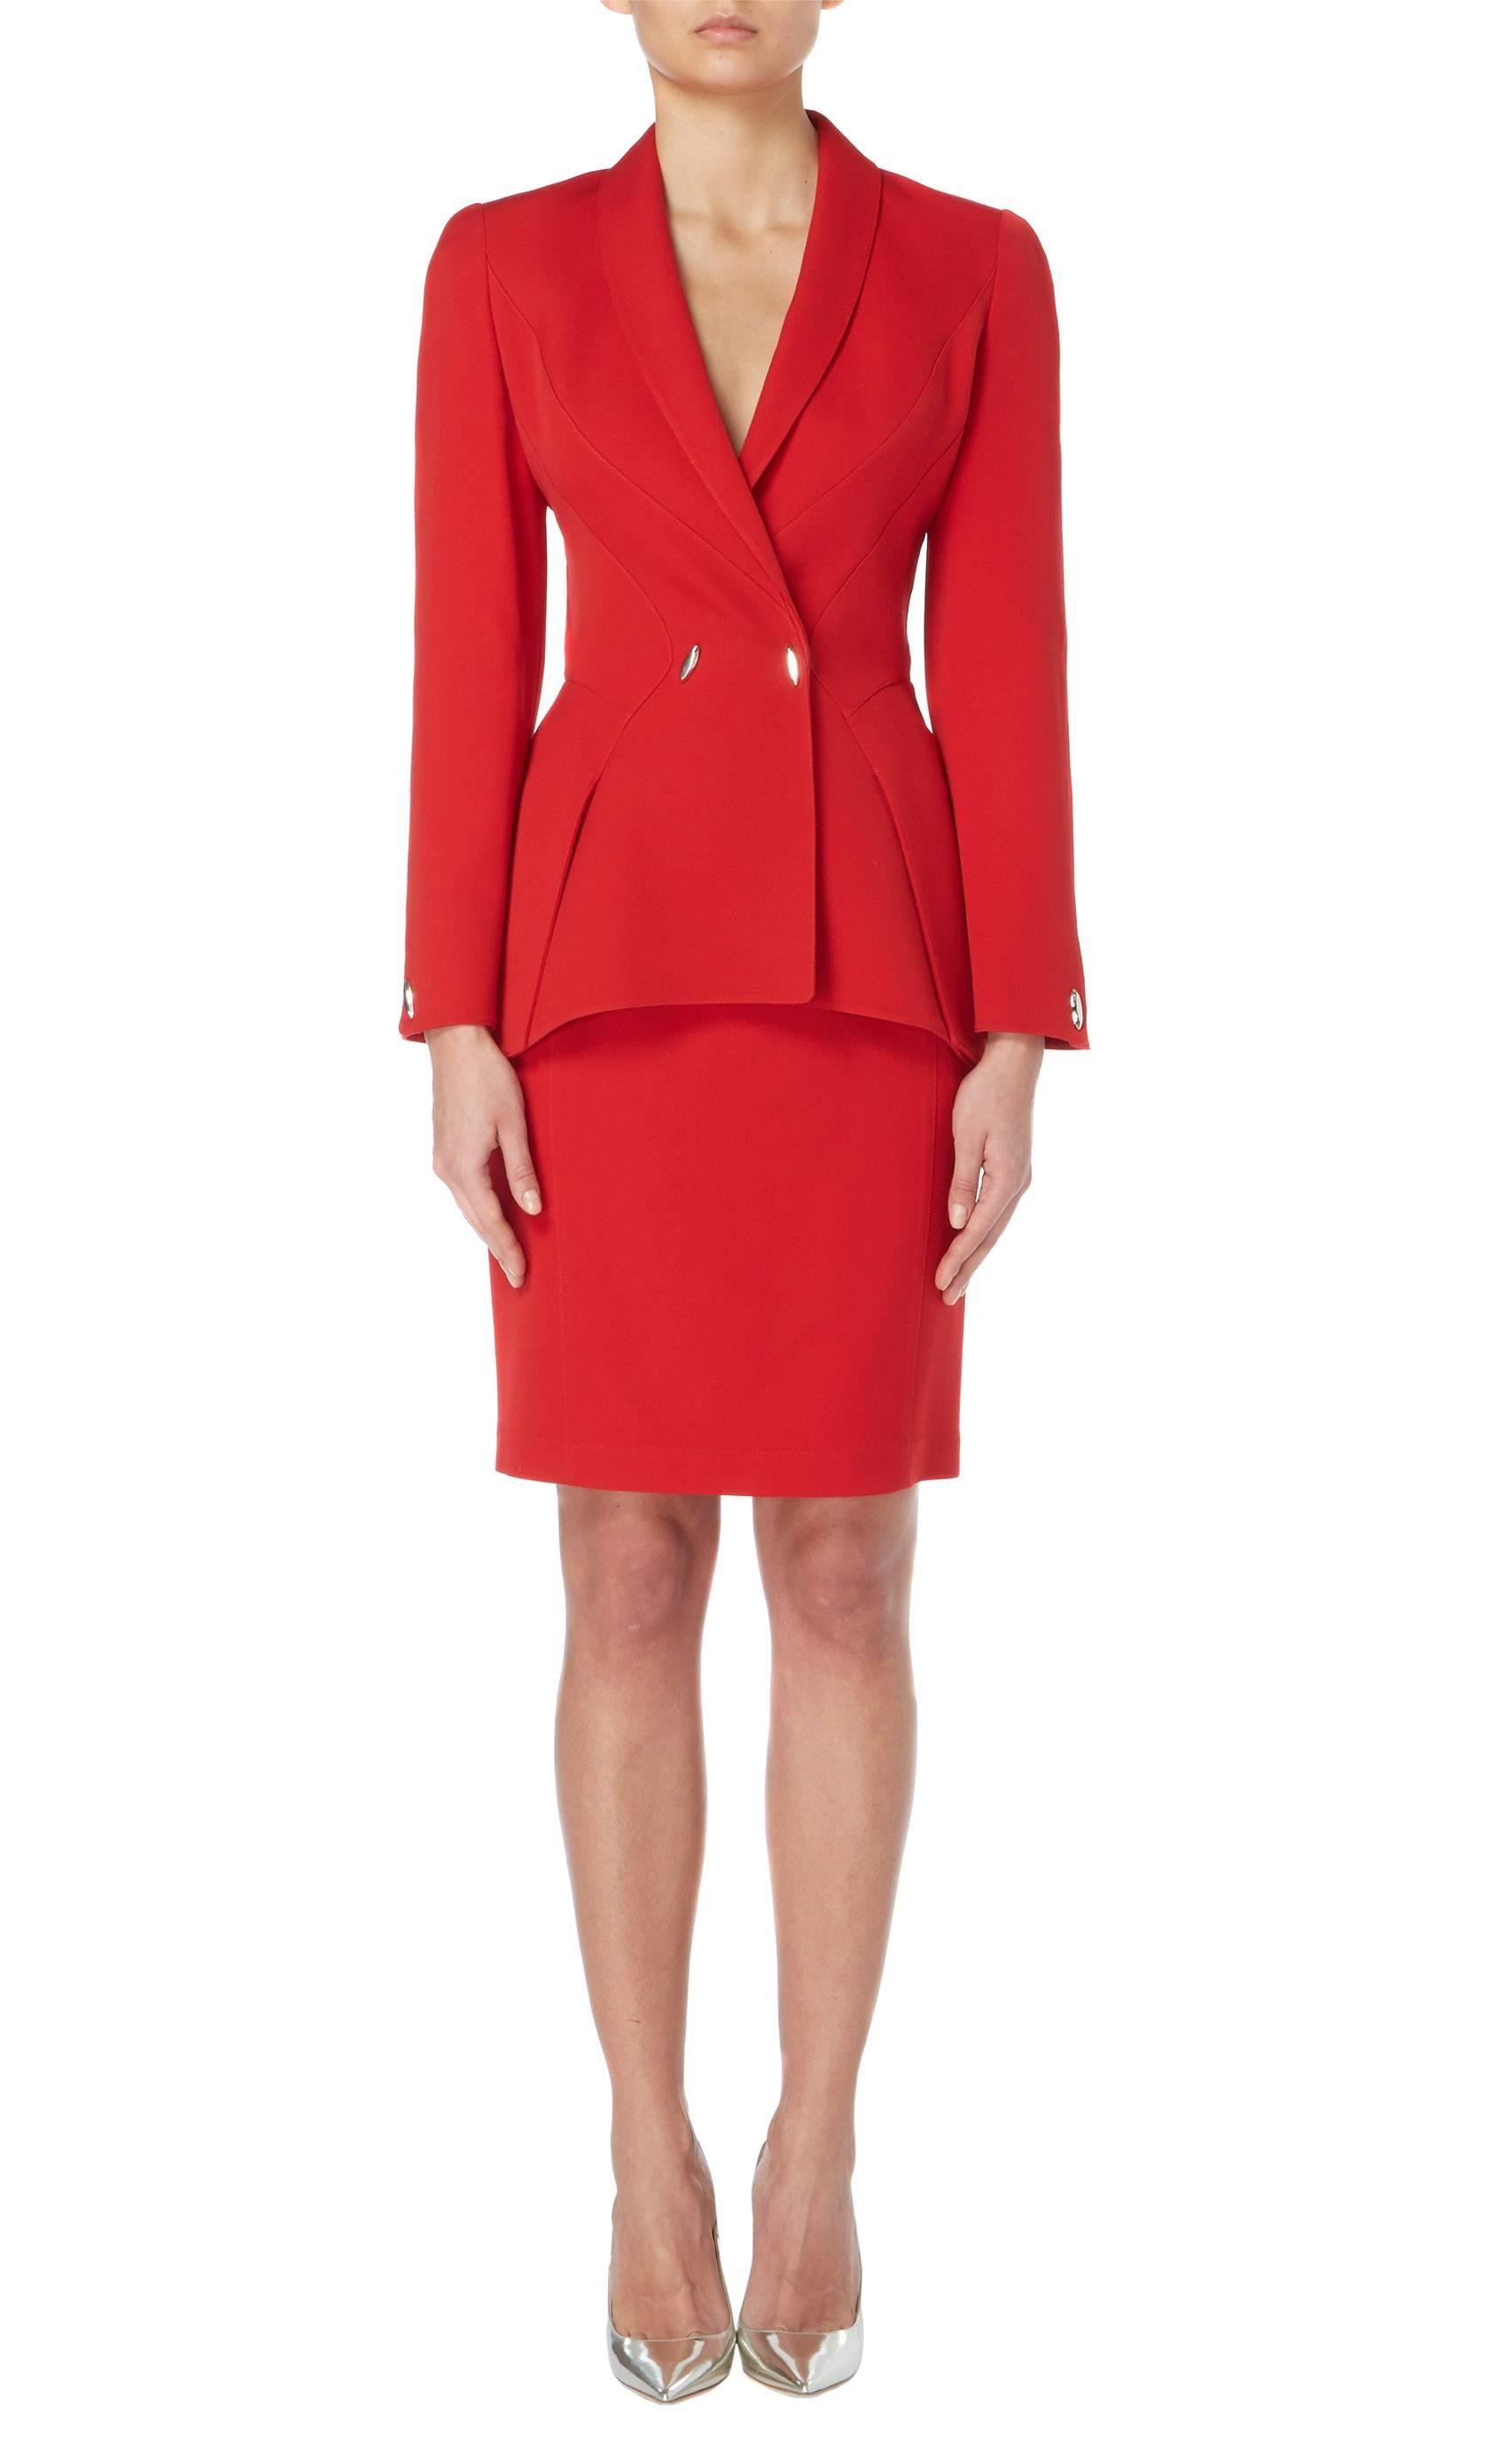 A fantastic example of the legendary Thierry Mugler’s signature silhouette, this skirt suit is sharply tailored in red wool and comprises of a long sleeved jacket and skirt. The jacket features a nipped in waist, creating a flattering hourglass